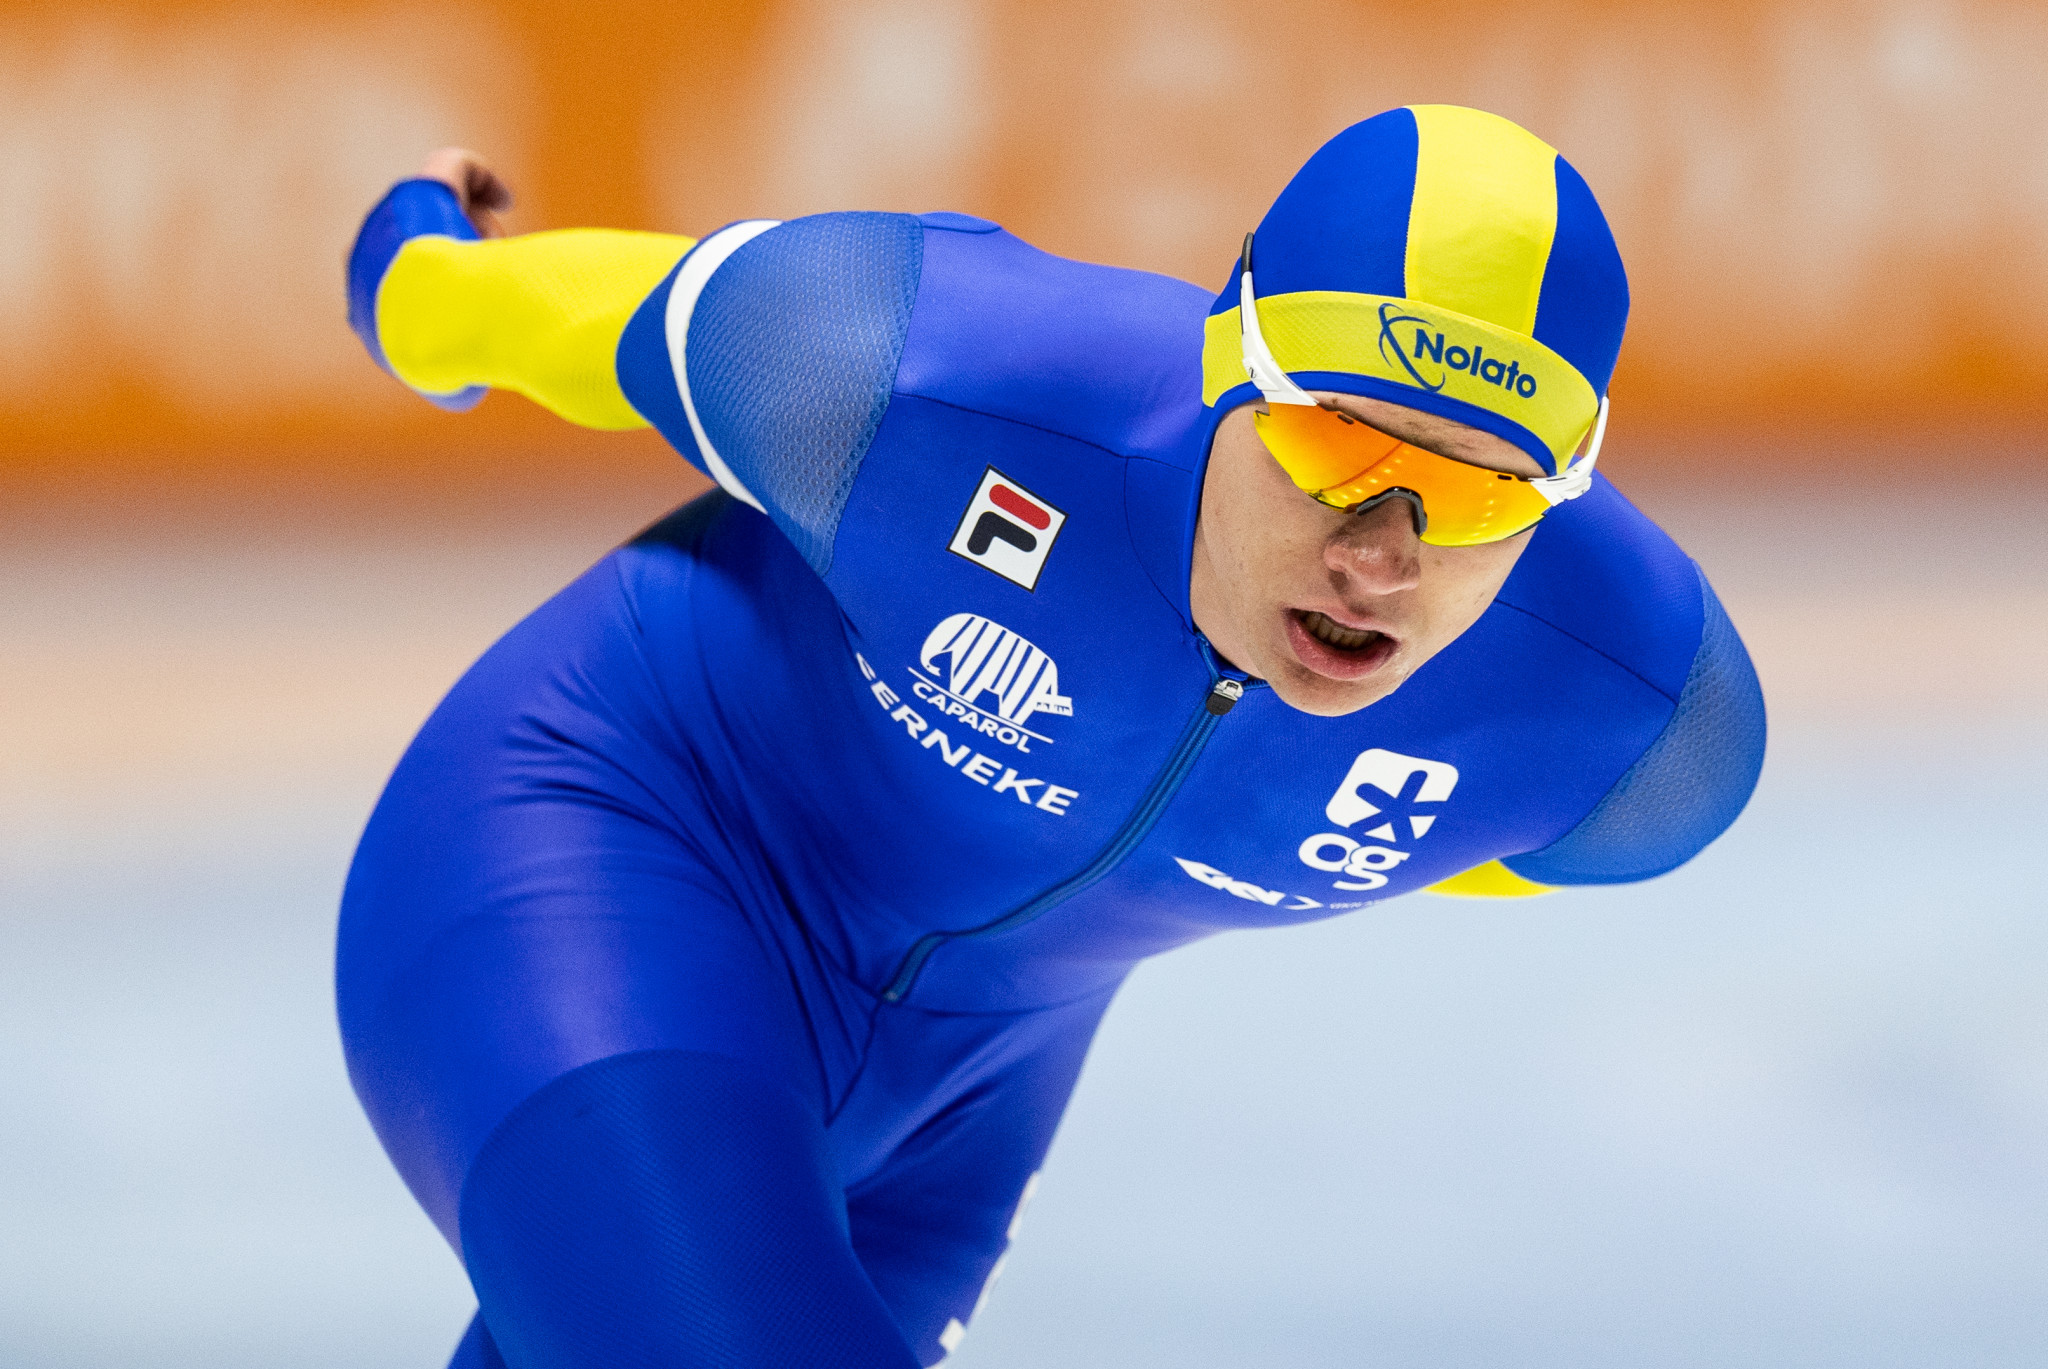 Nils van der Poel of Sweden followed up a men's 5,000m victory last weekend by winning the 10,000m event in Stavanger ©Getty Images